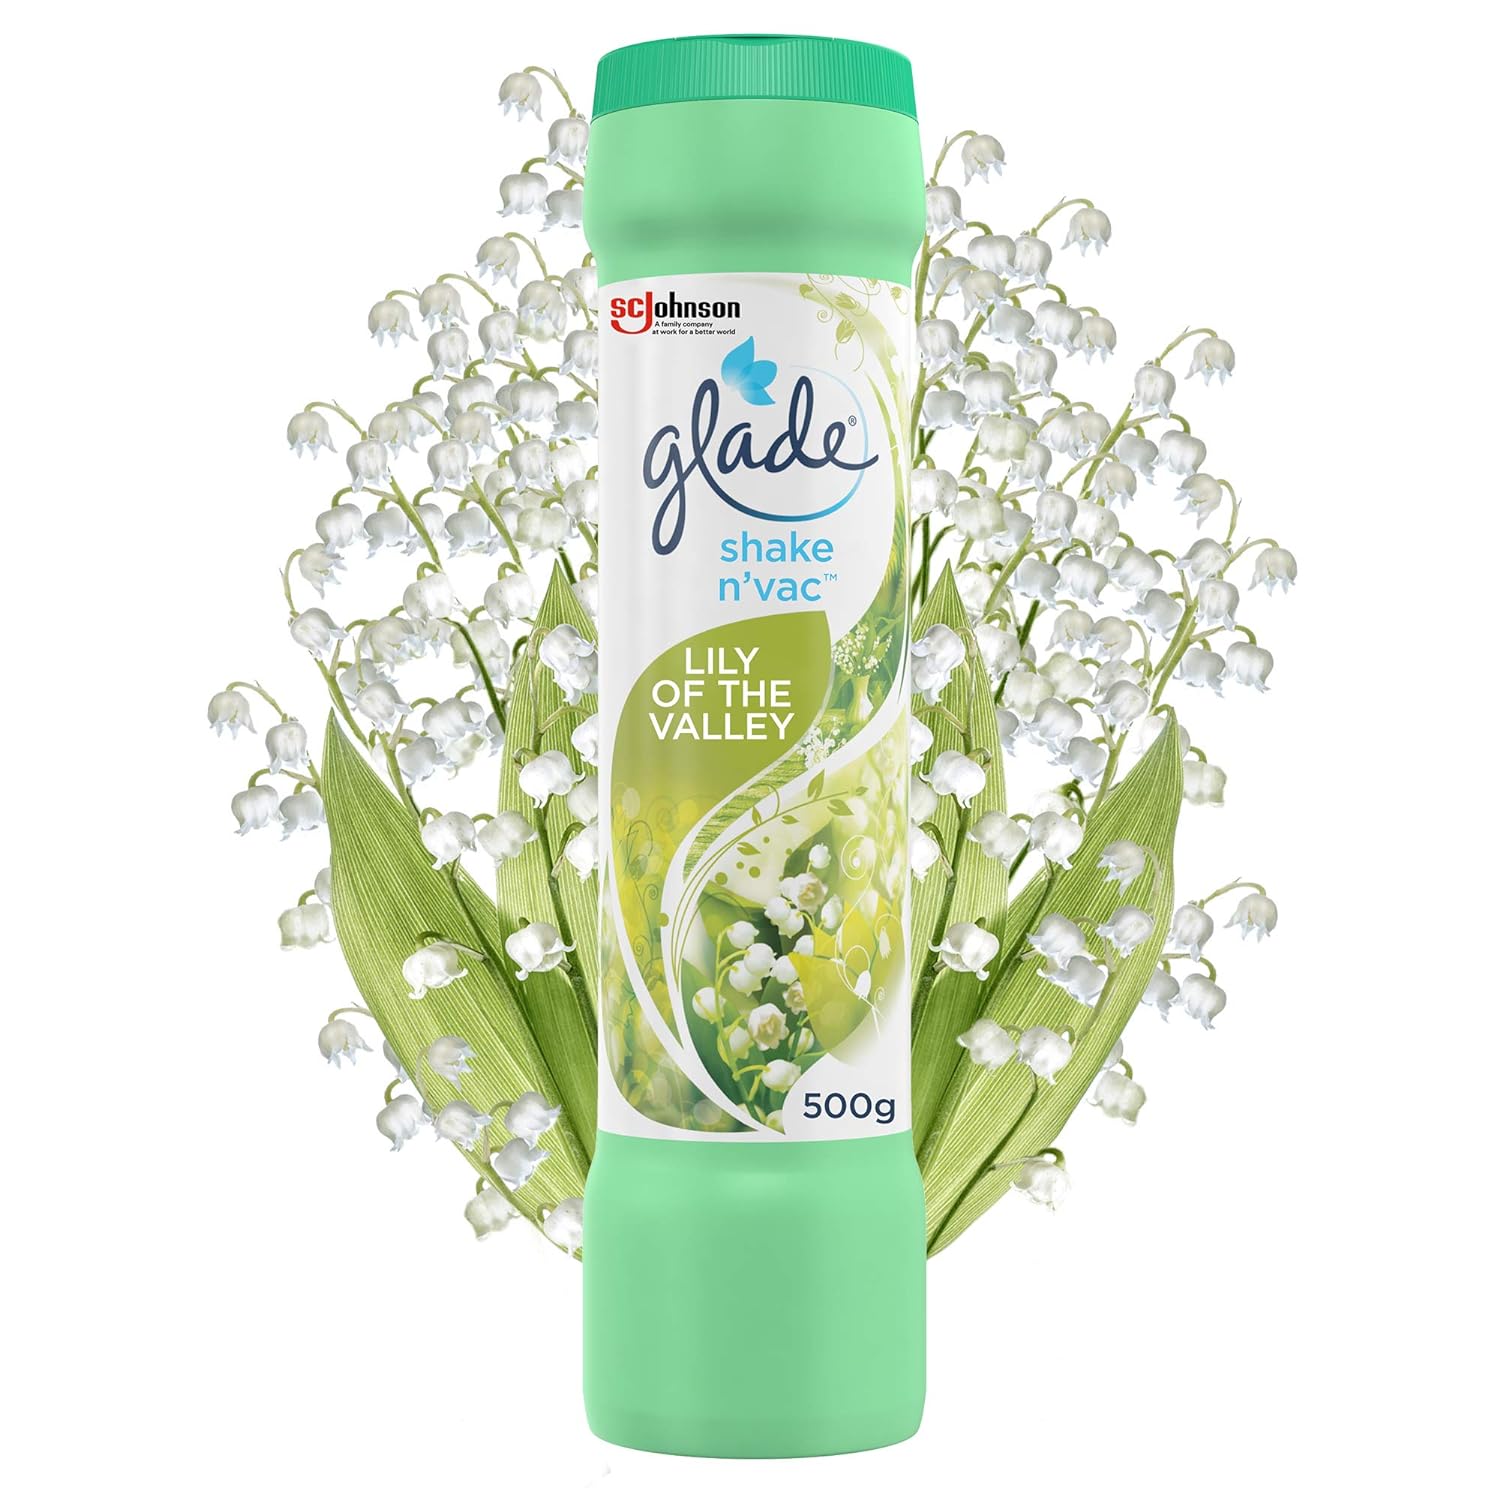 Glade Shake 'n' Vac 500g Lily of the Valley - 92201